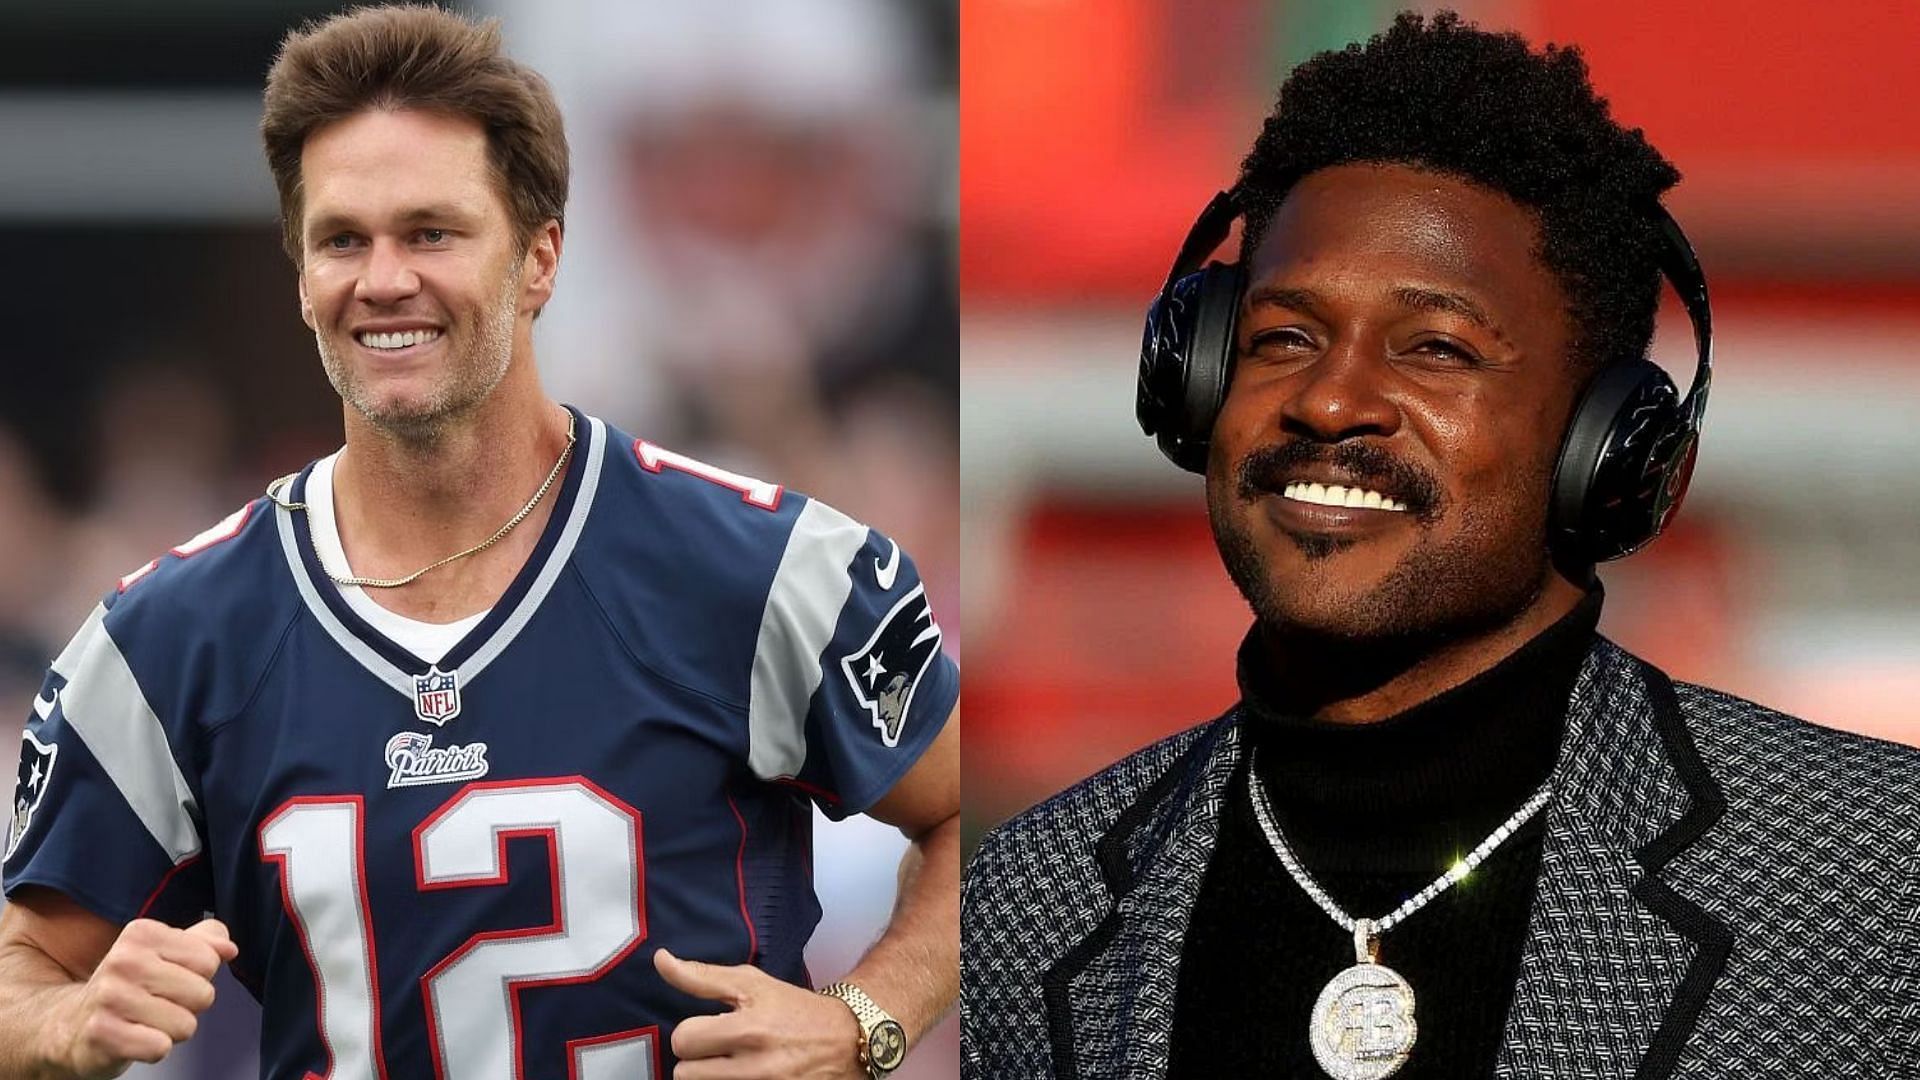 Former Tampa Bay Buccaneers players Tom Brady and Antonio Brown